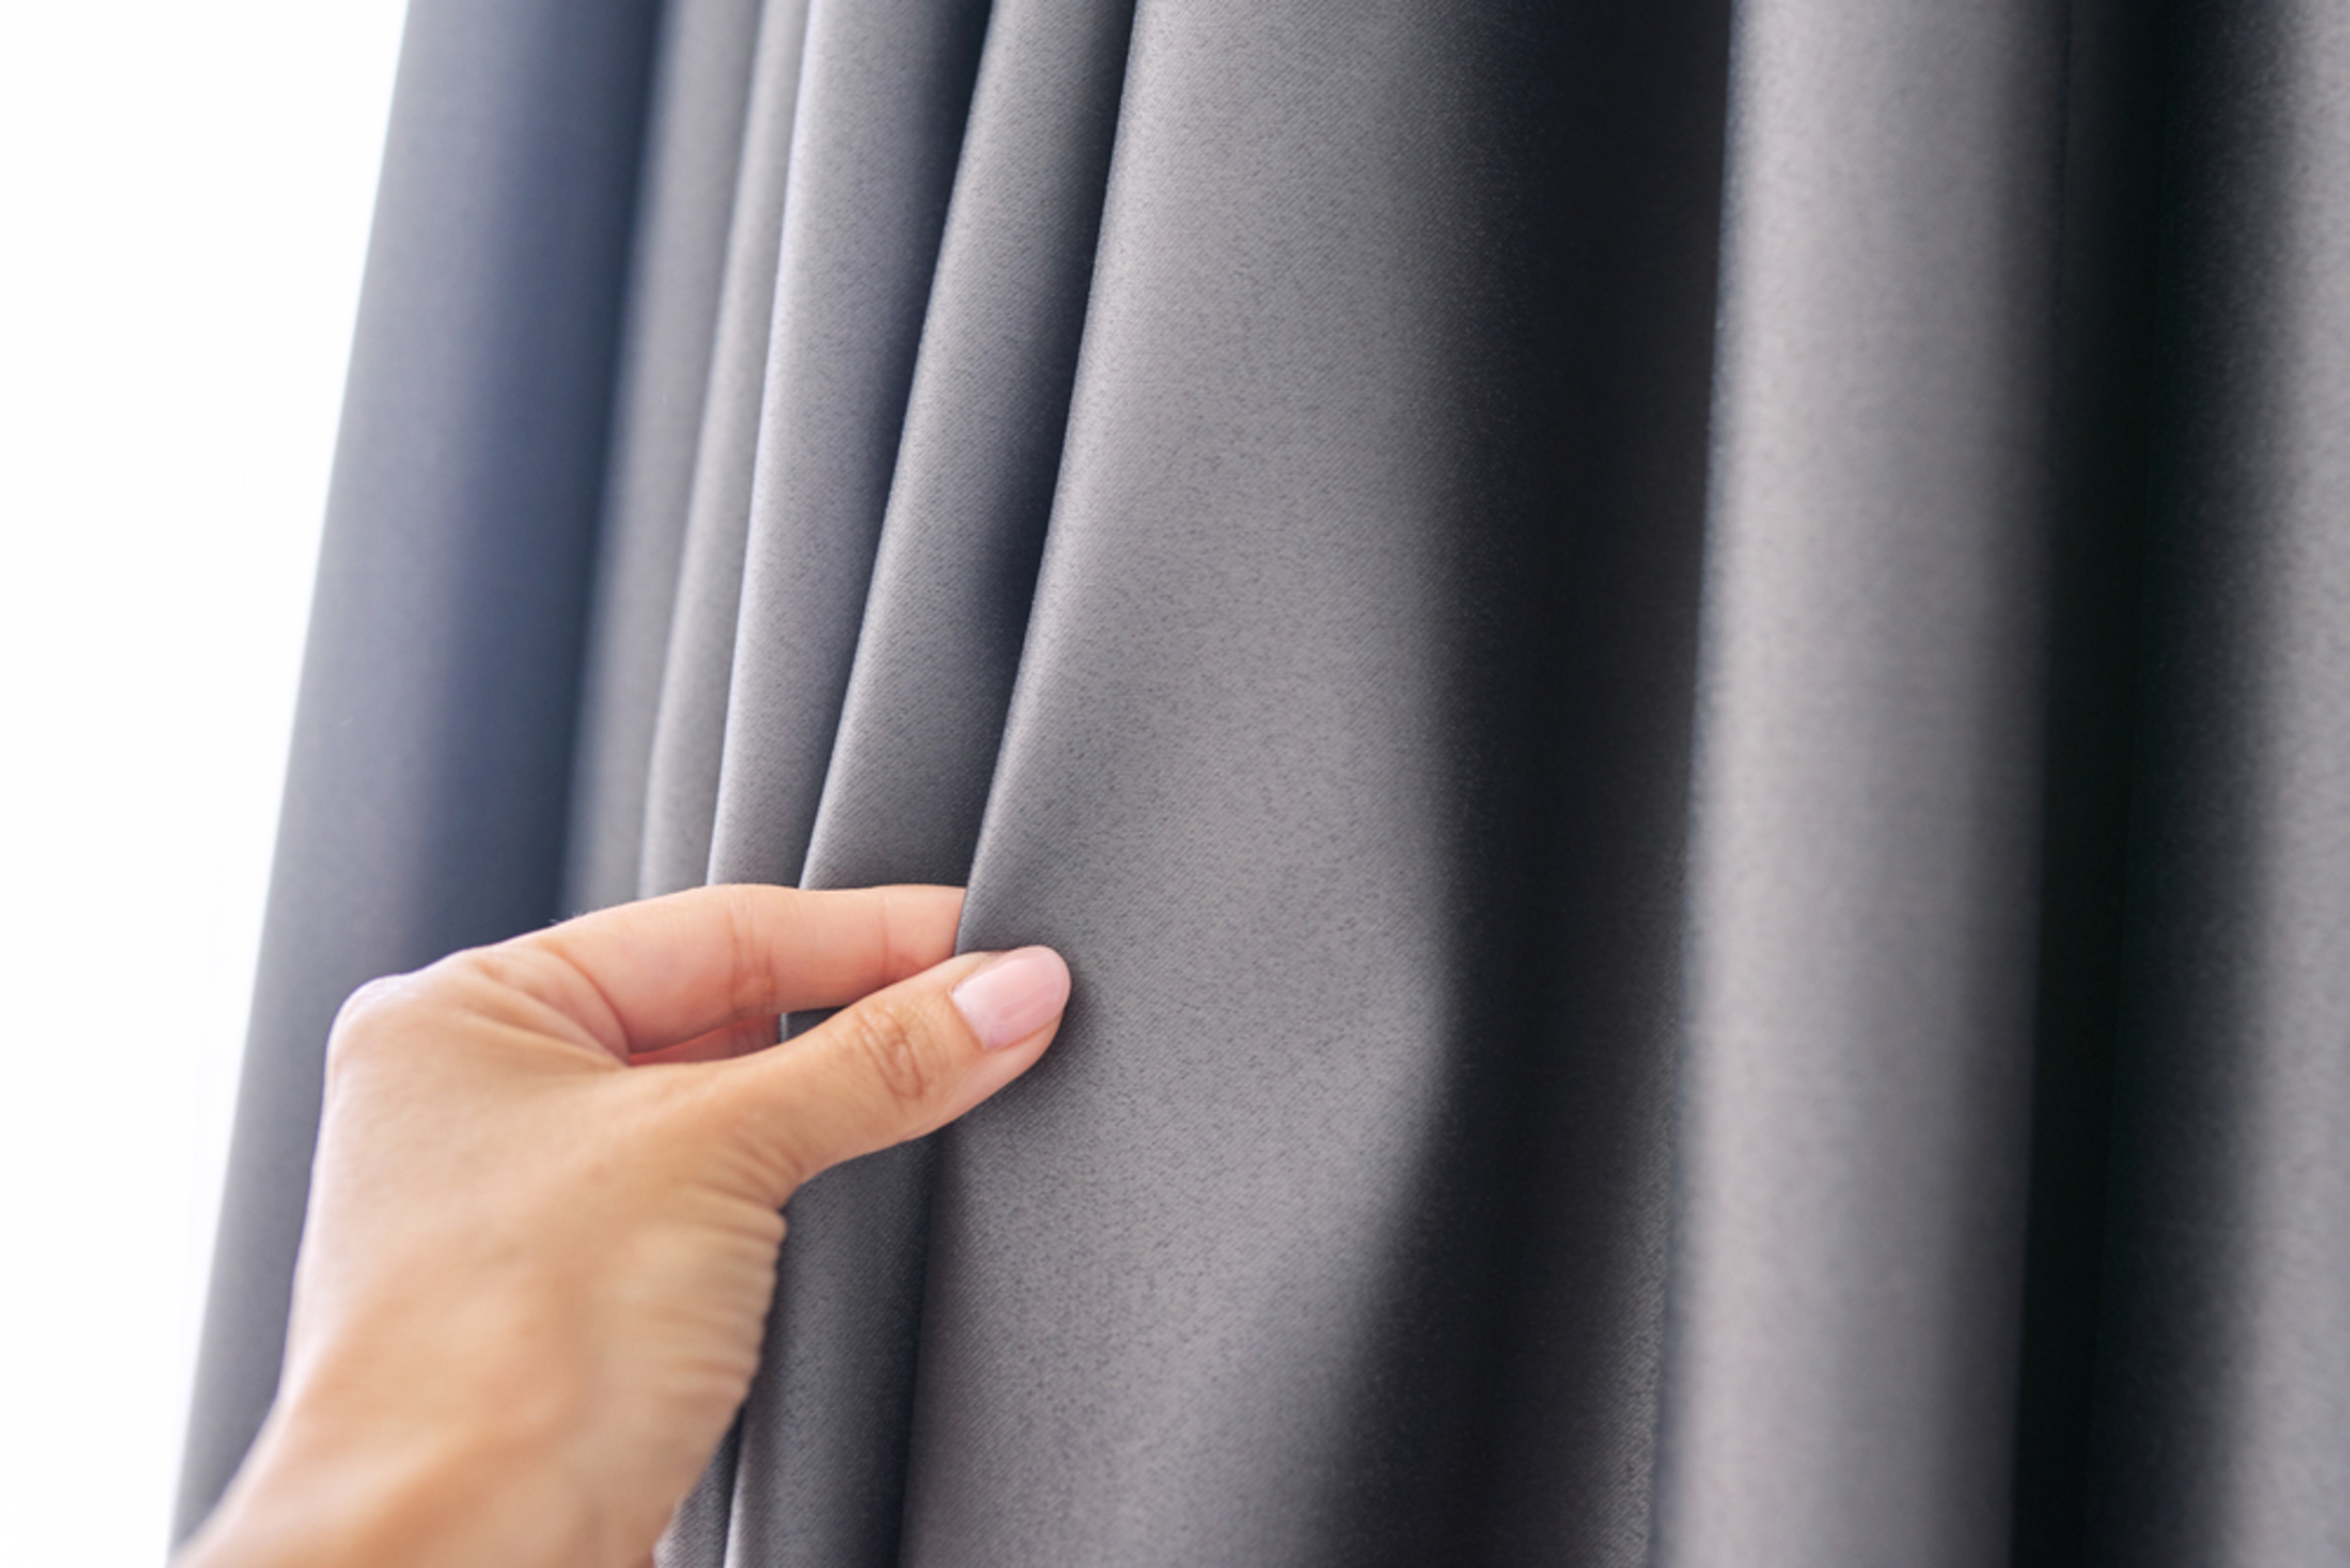 <p>They may not always be the most fashionable, but many discount retailers sell blackout curtains that will block the sun's rays and keep your home cooler in the process. If you're willing to splurge, though, you can definitely find some heavy, light-blocking drapes in a style you love. </p><p><a href='https://www.msn.com/en-us/community/channel/vid-cj9pqbr0vn9in2b6ddcd8sfgpfq6x6utp44fssrv6mc2gtybw0us'>Follow us on MSN to see more of our exclusive lifestyle content.</a></p>